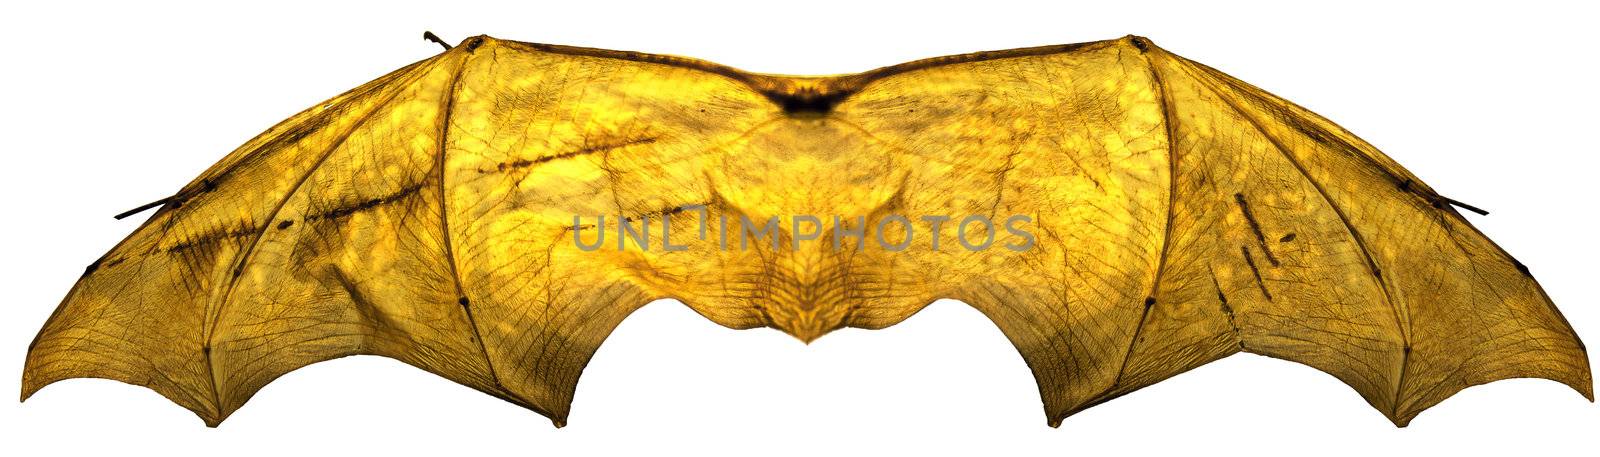 Glowing Isolated BatWings by p0temkin